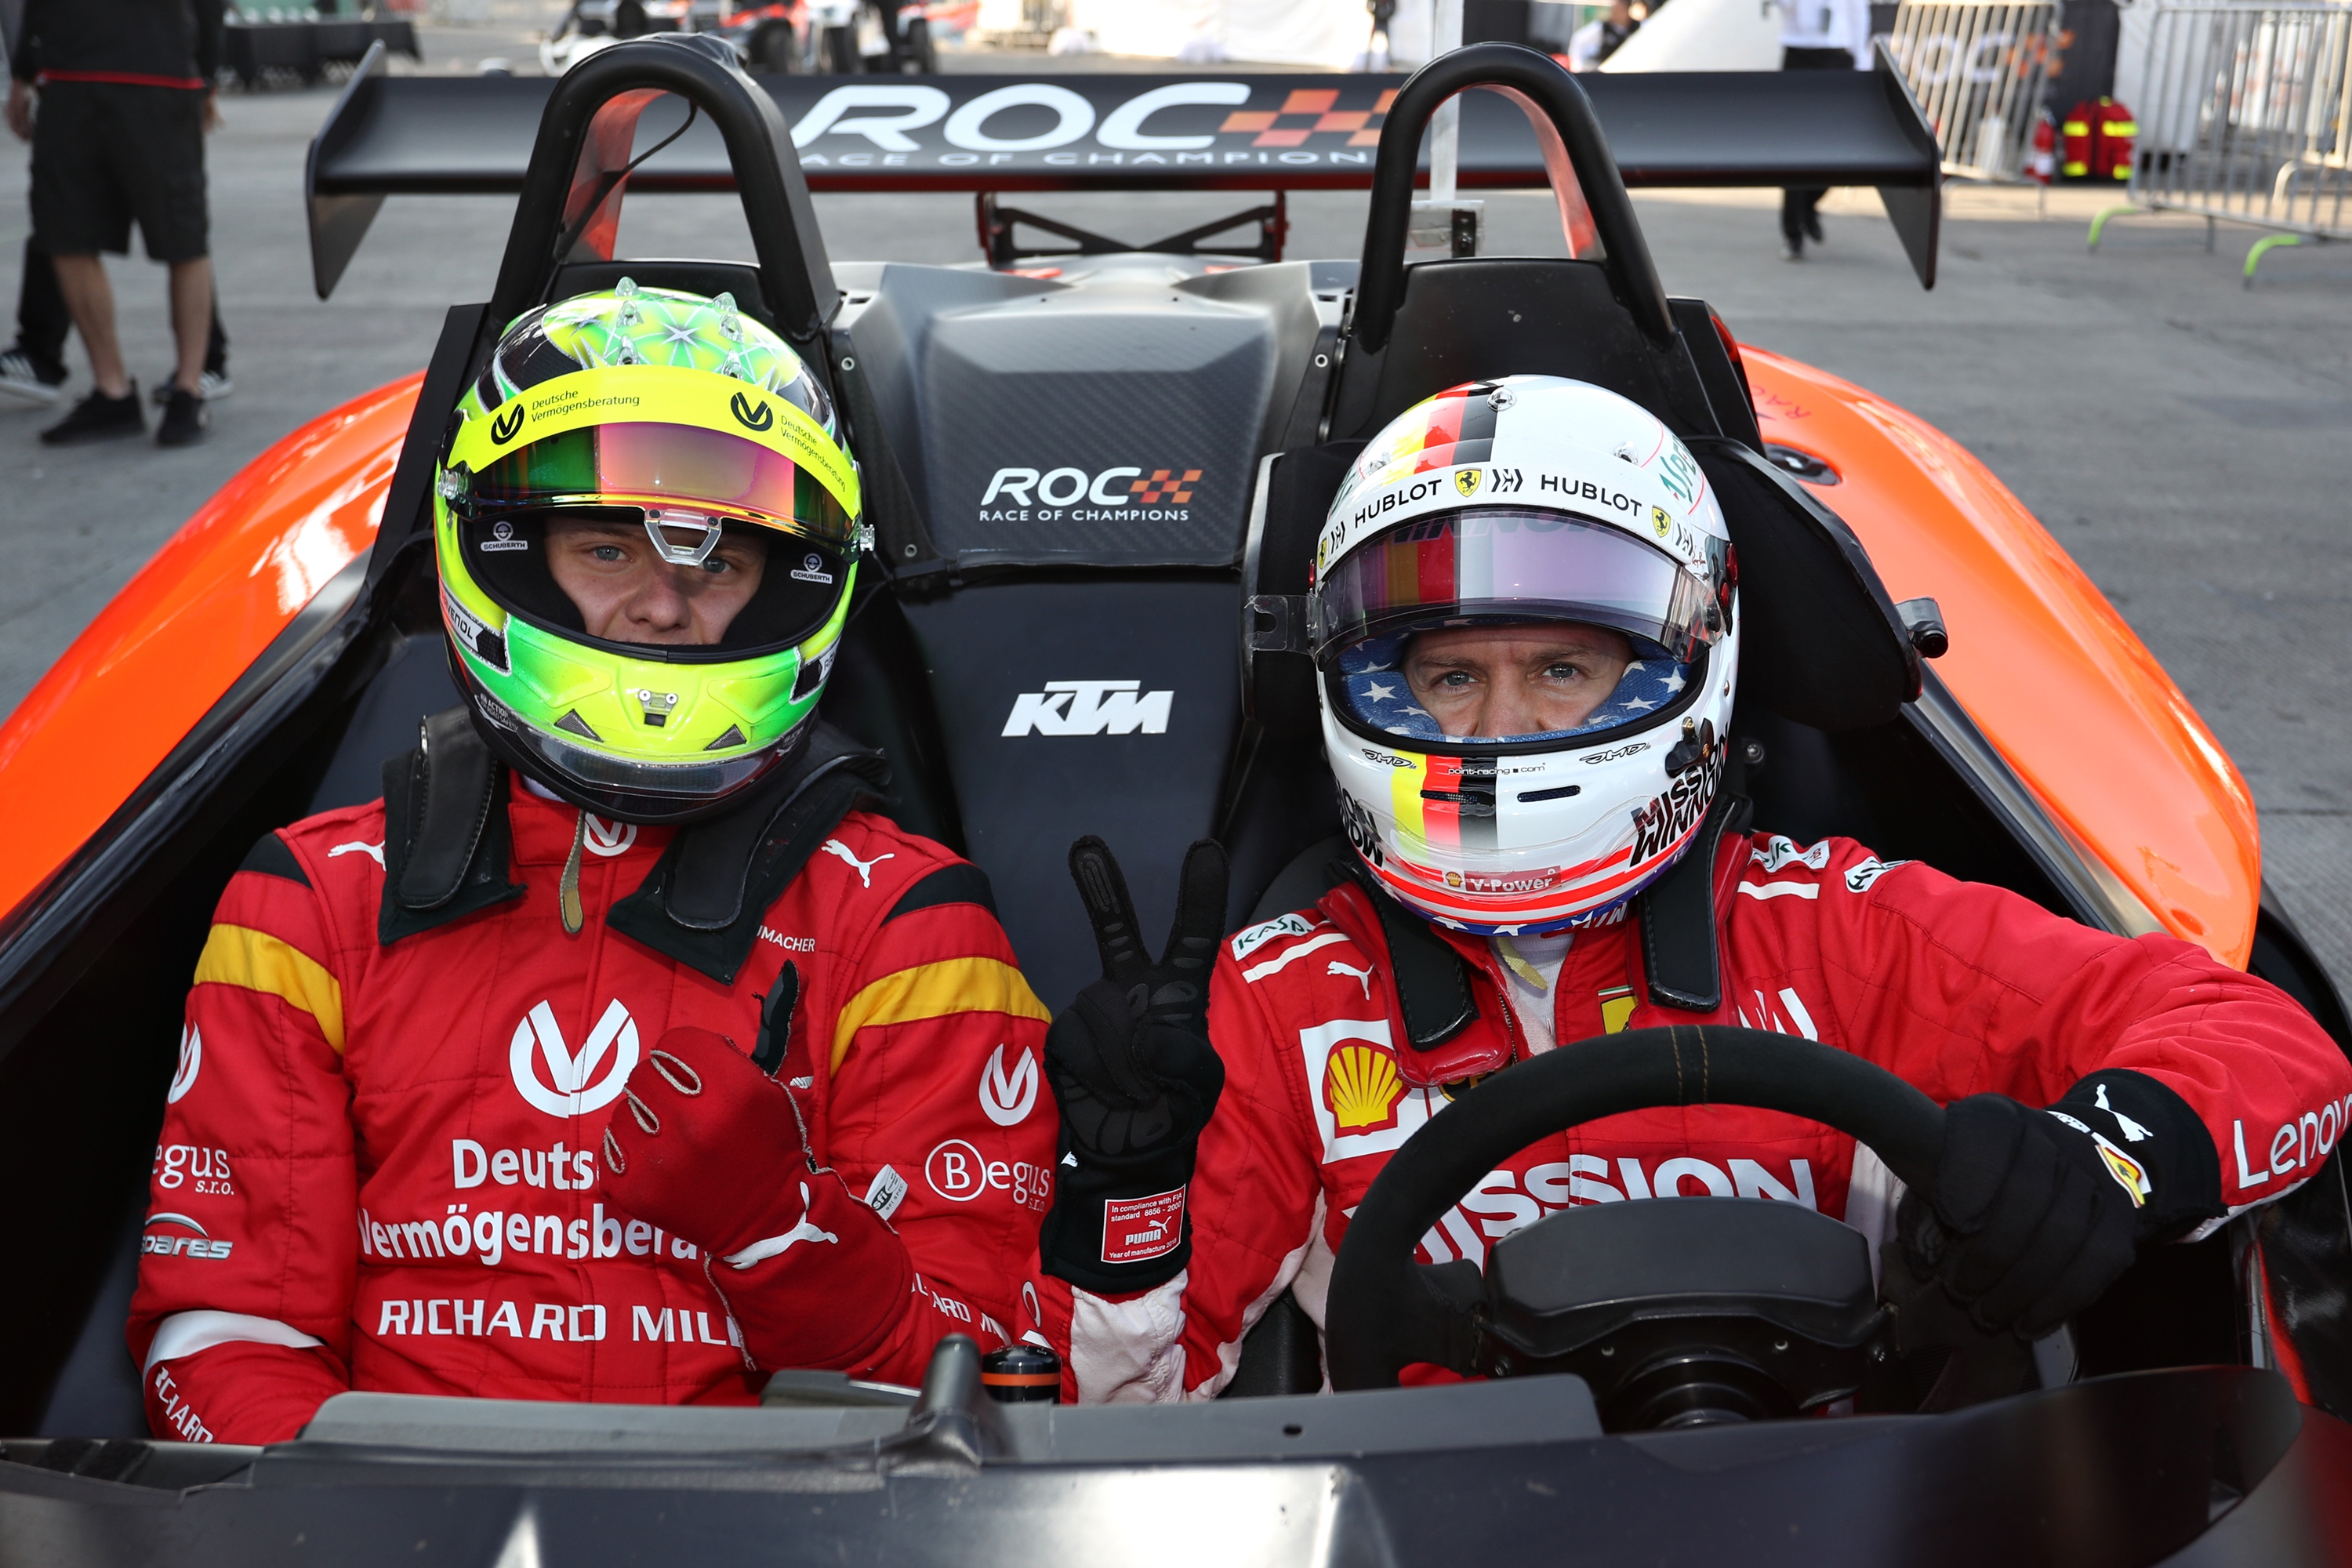 sebastian_vettel_ger_prepares_to_drive_with_mick_schumacher_ger_as_a_passenger_during_practice_for_the_race_of_champions_on_saturday_19_january_2019_at_foro_sol_mexi.JPG